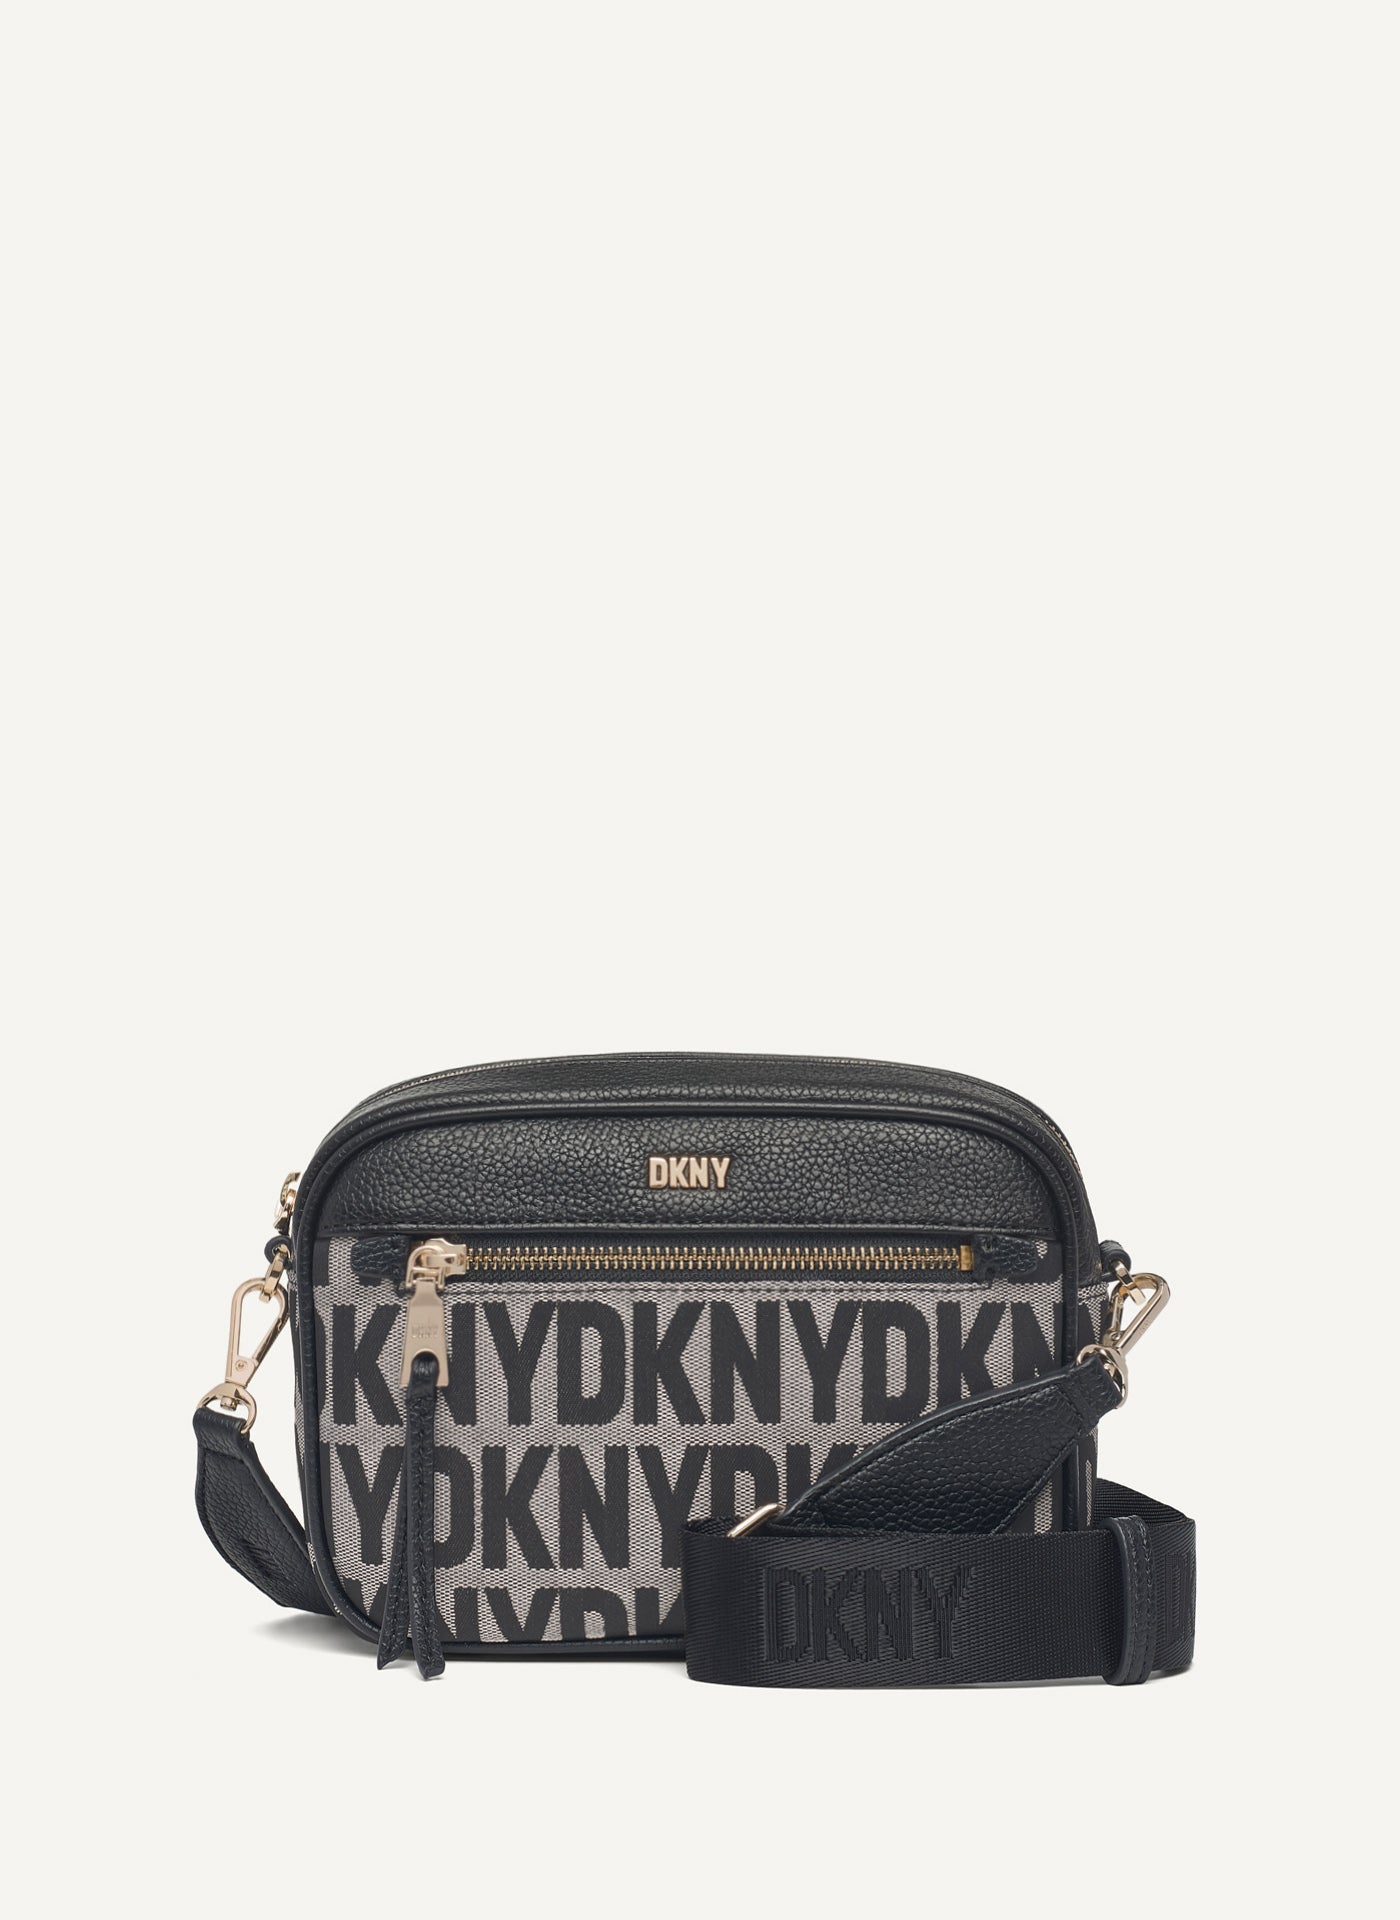 DKNY Bags For Women on Sale | ShopStyle CA